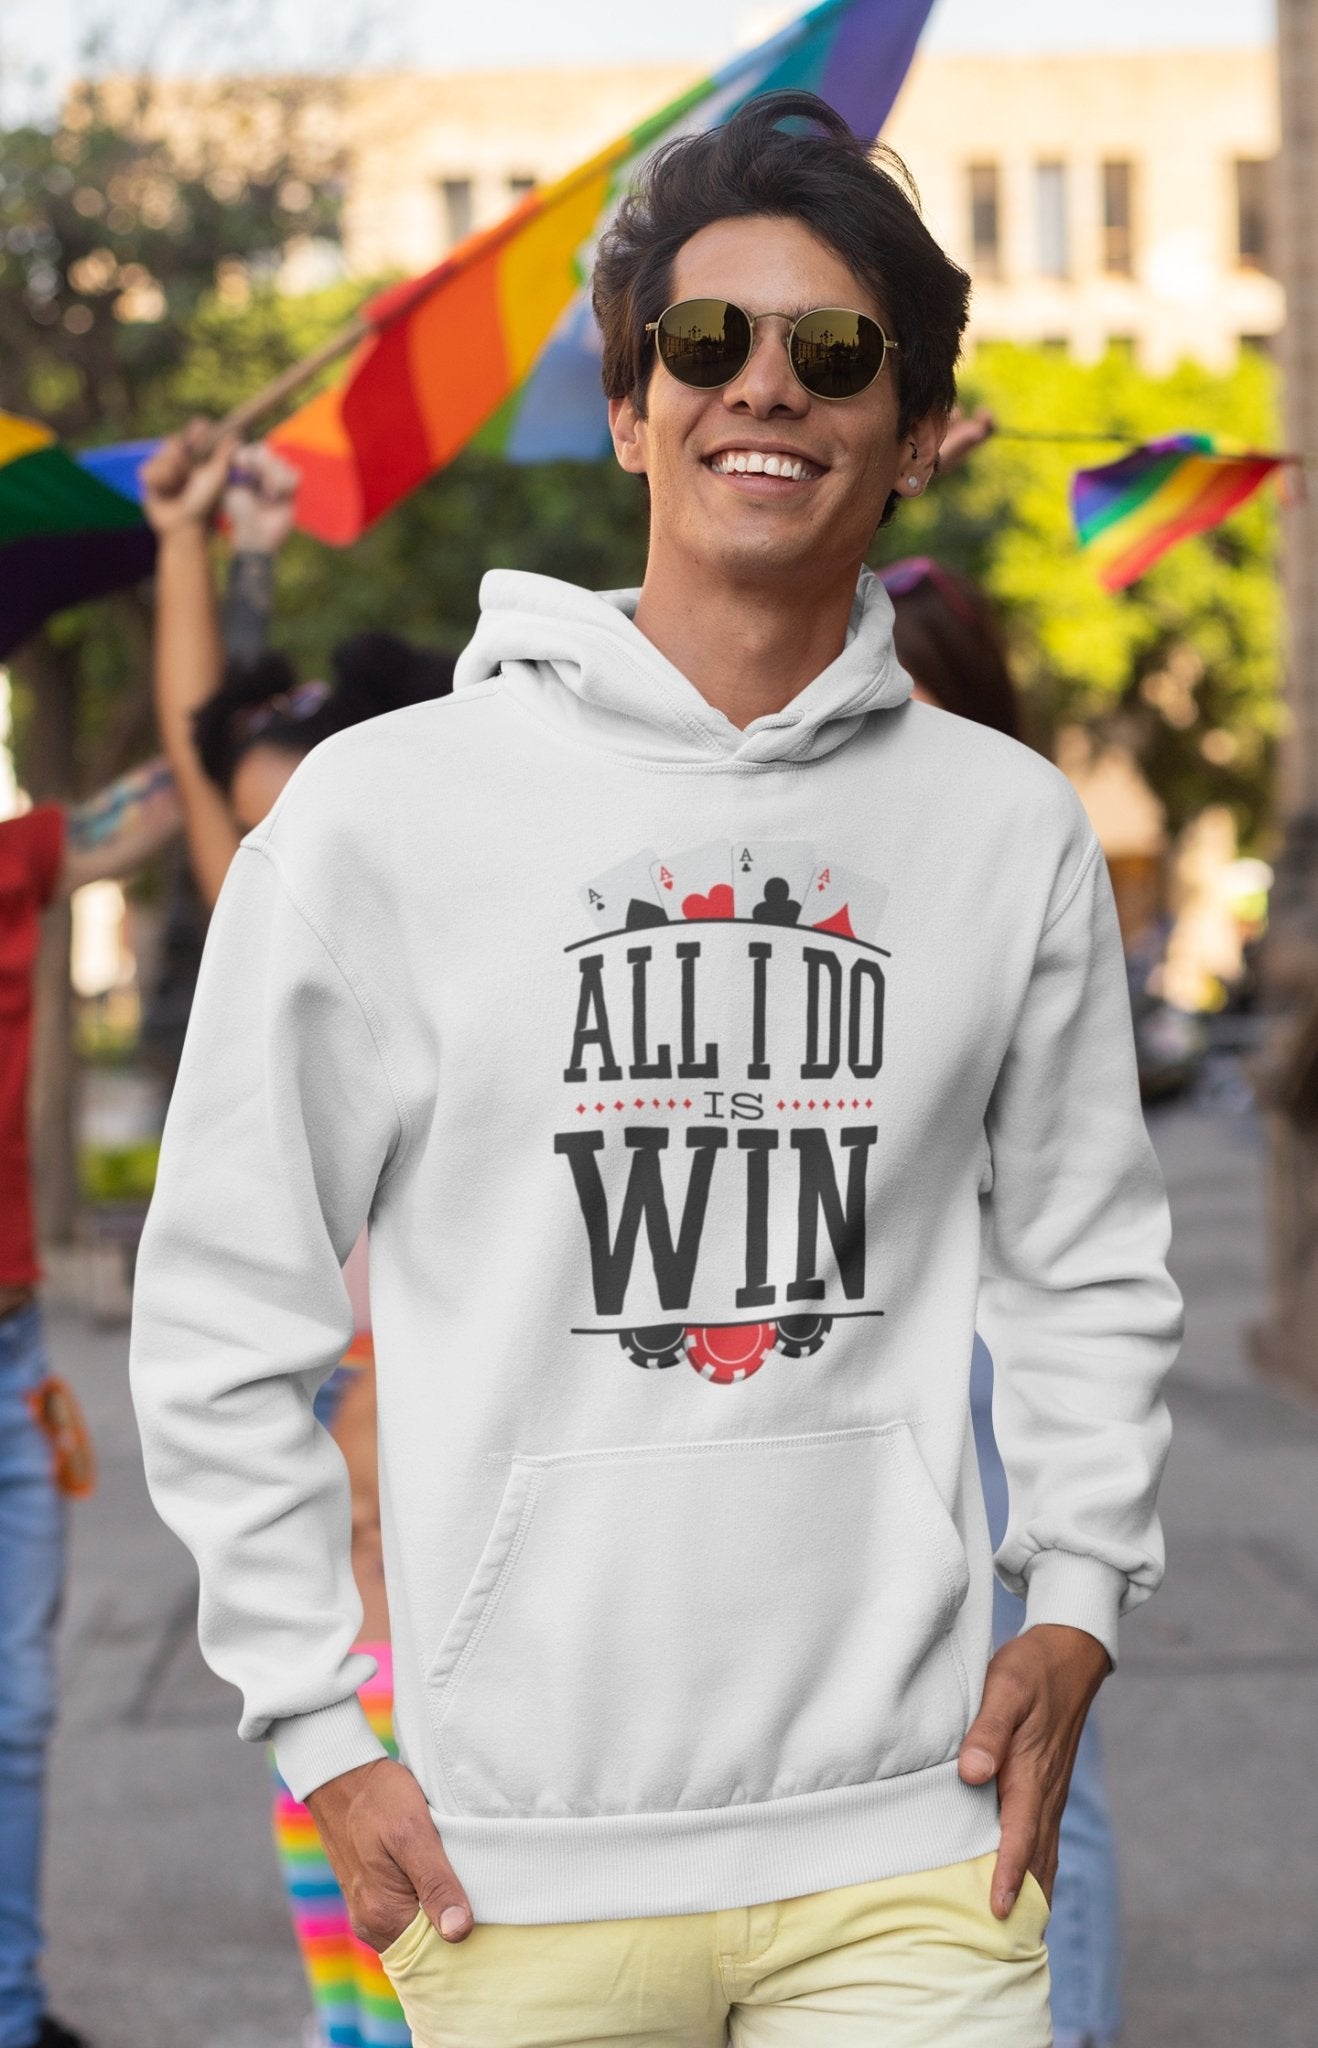 All Do Is Win Men Hoodies-FunkyTradition - FunkyTradition